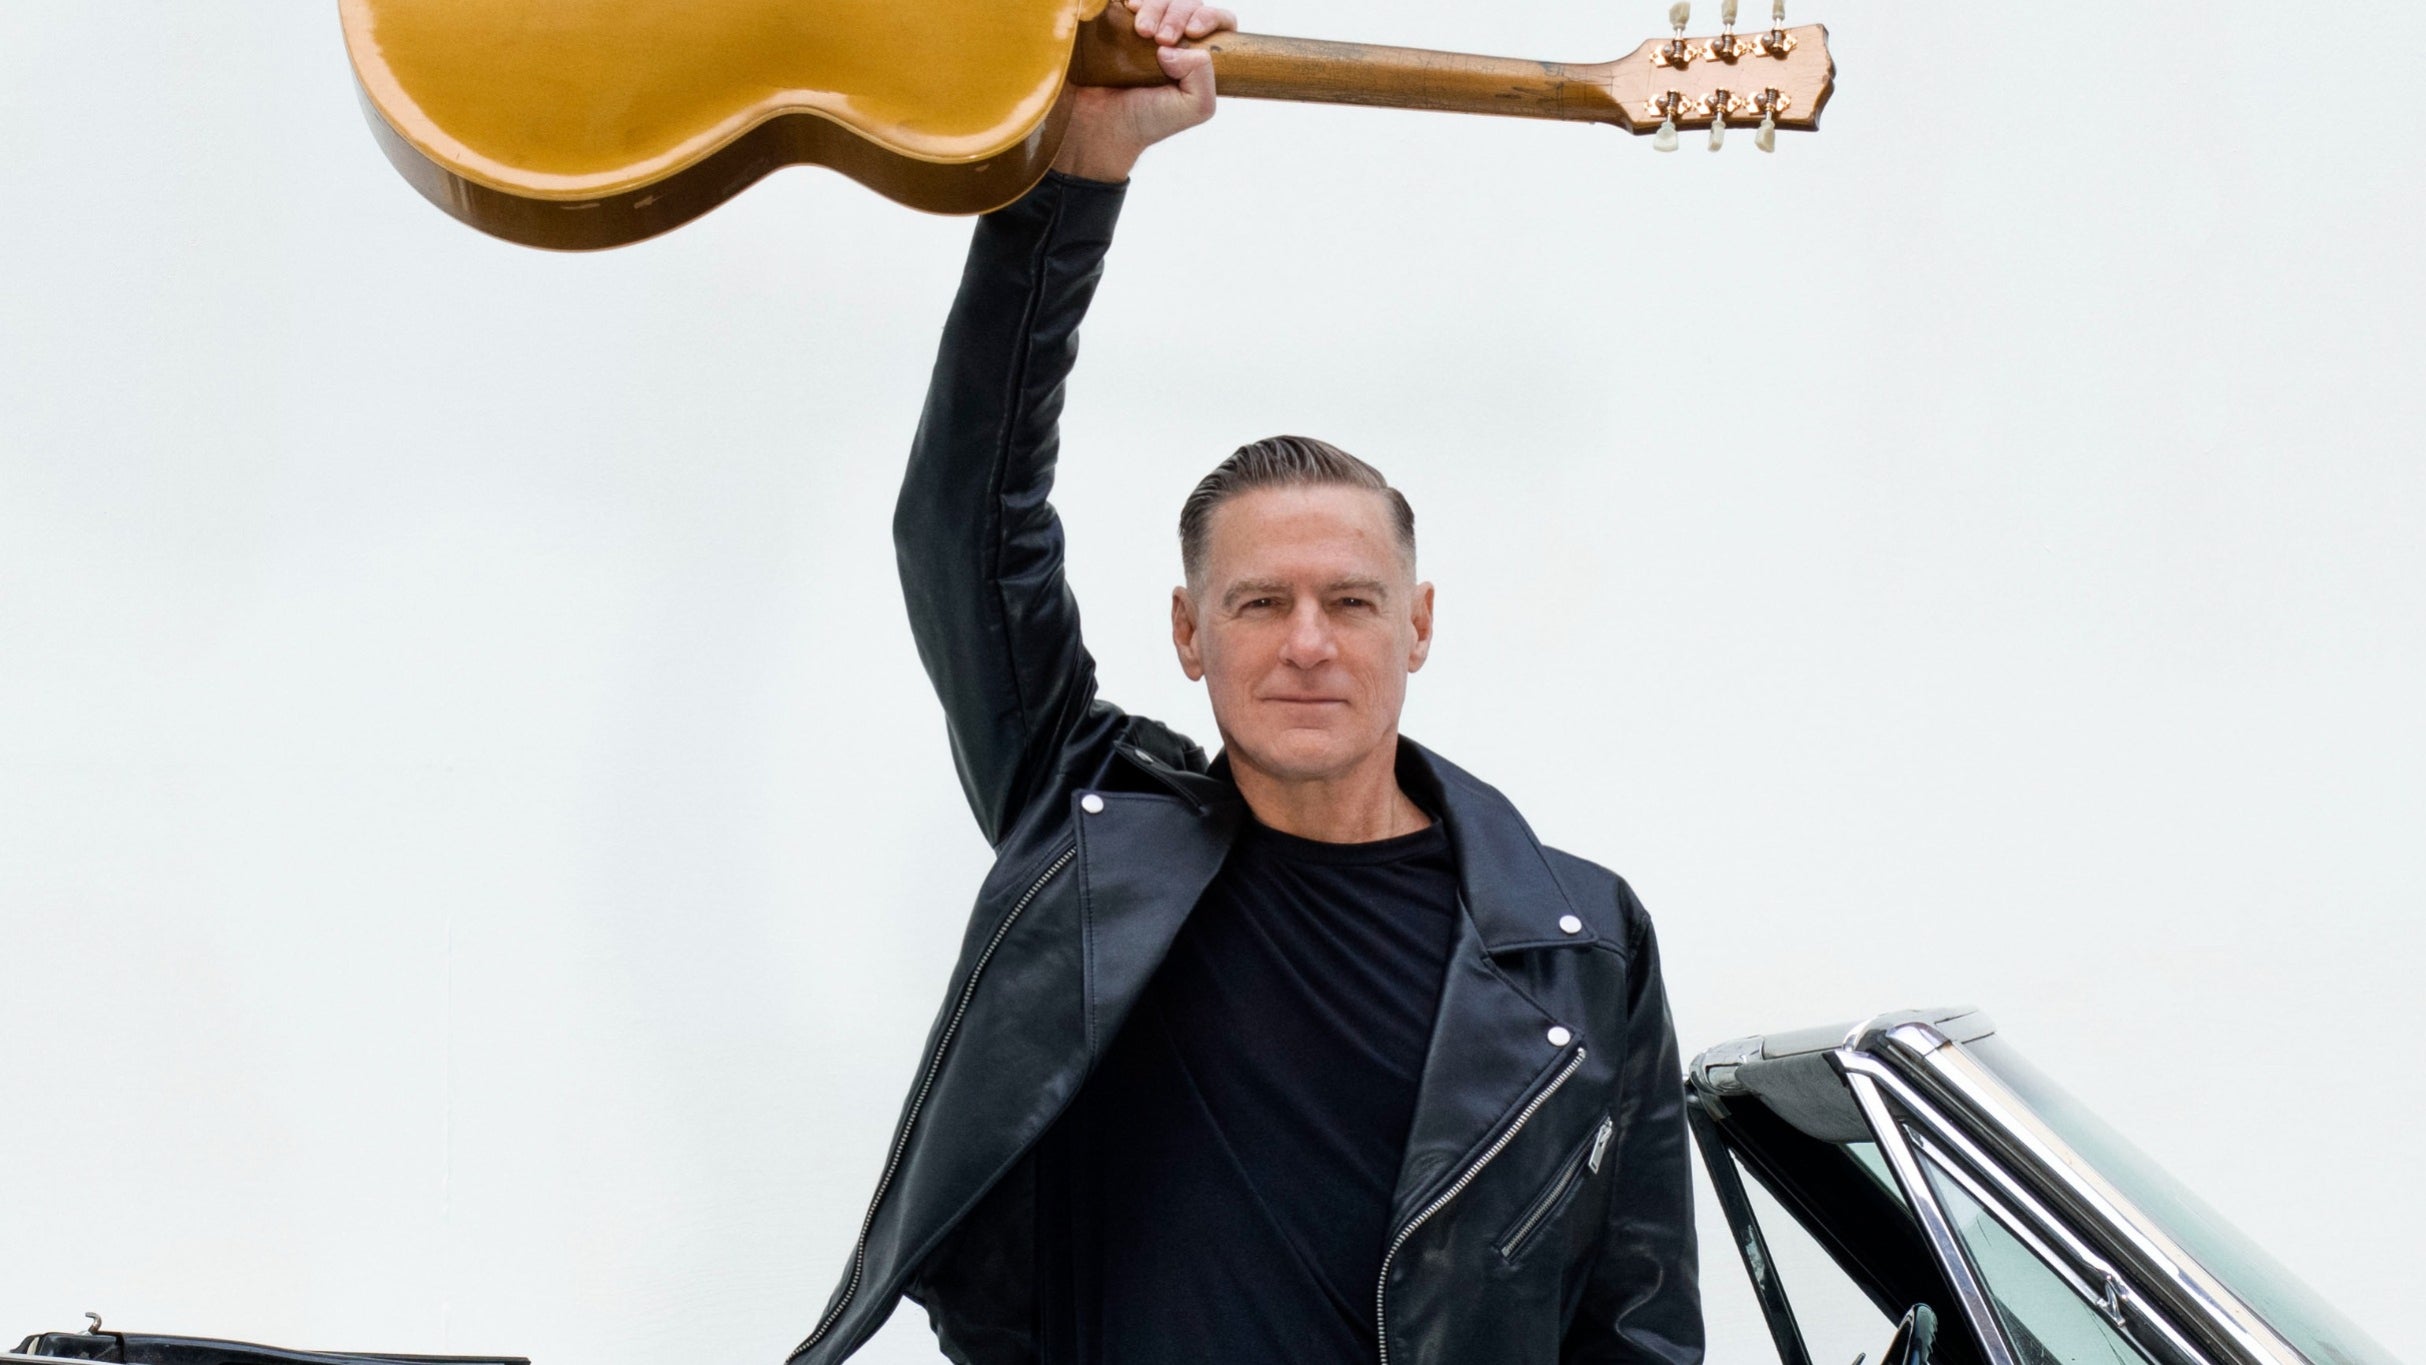 Bryan Adams: So Happy It Hurts w/ Eurythmics Songbook ft. Dave Stewart free presale password for early tickets in Omaha